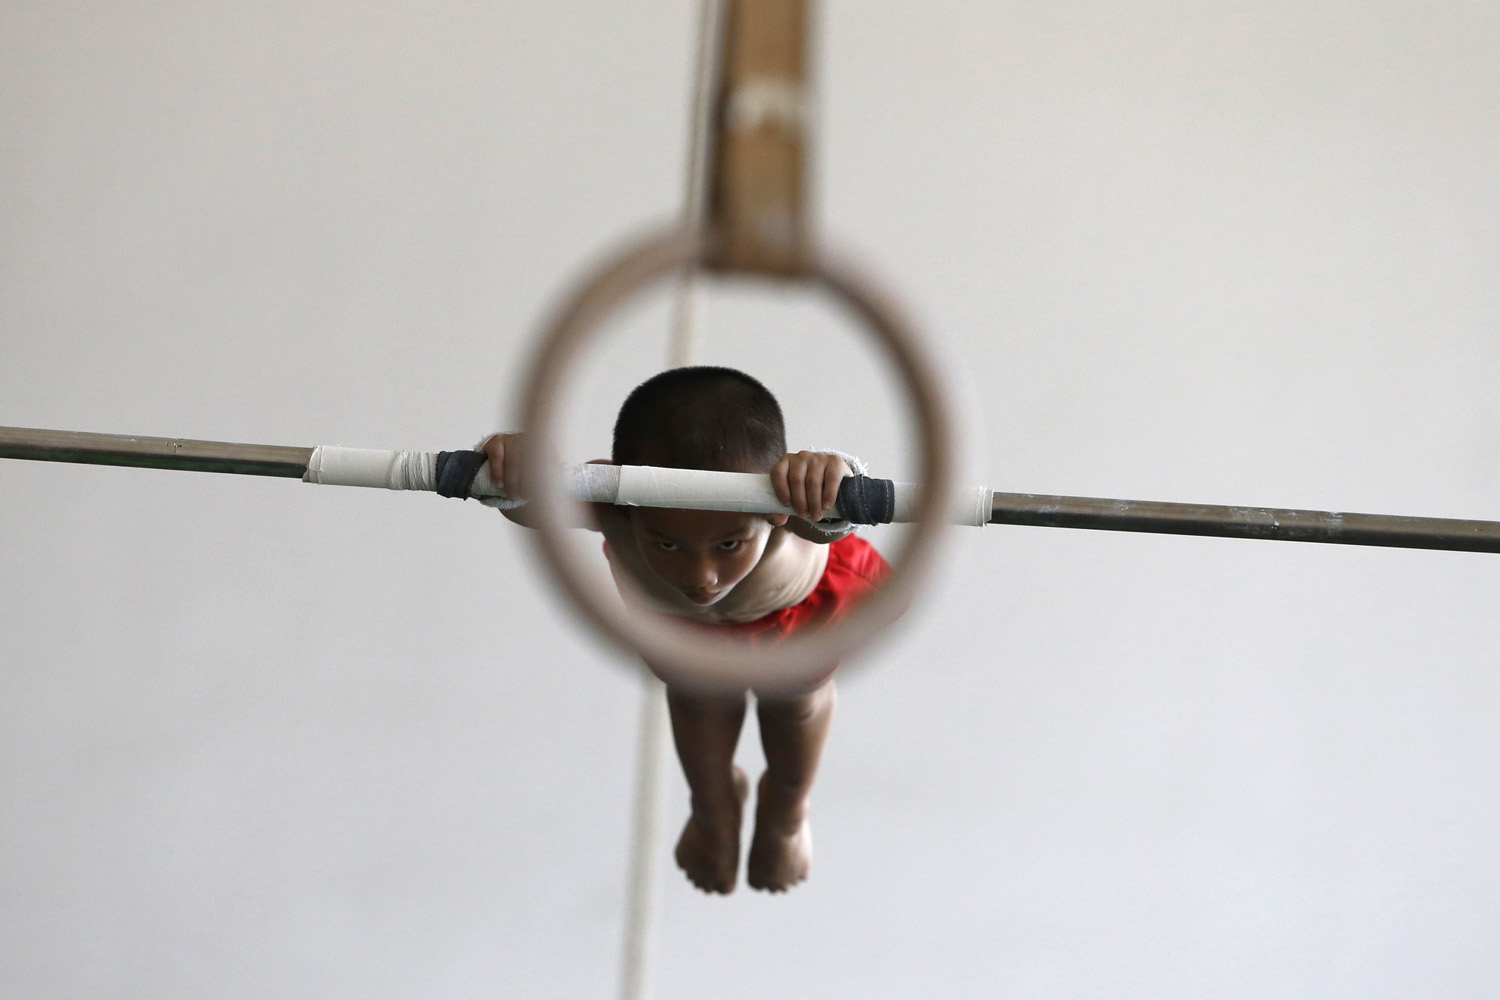 Six-year-old gymnast practices on a horizontal bar at the gymnastics hall of a sports school in Jiaxing